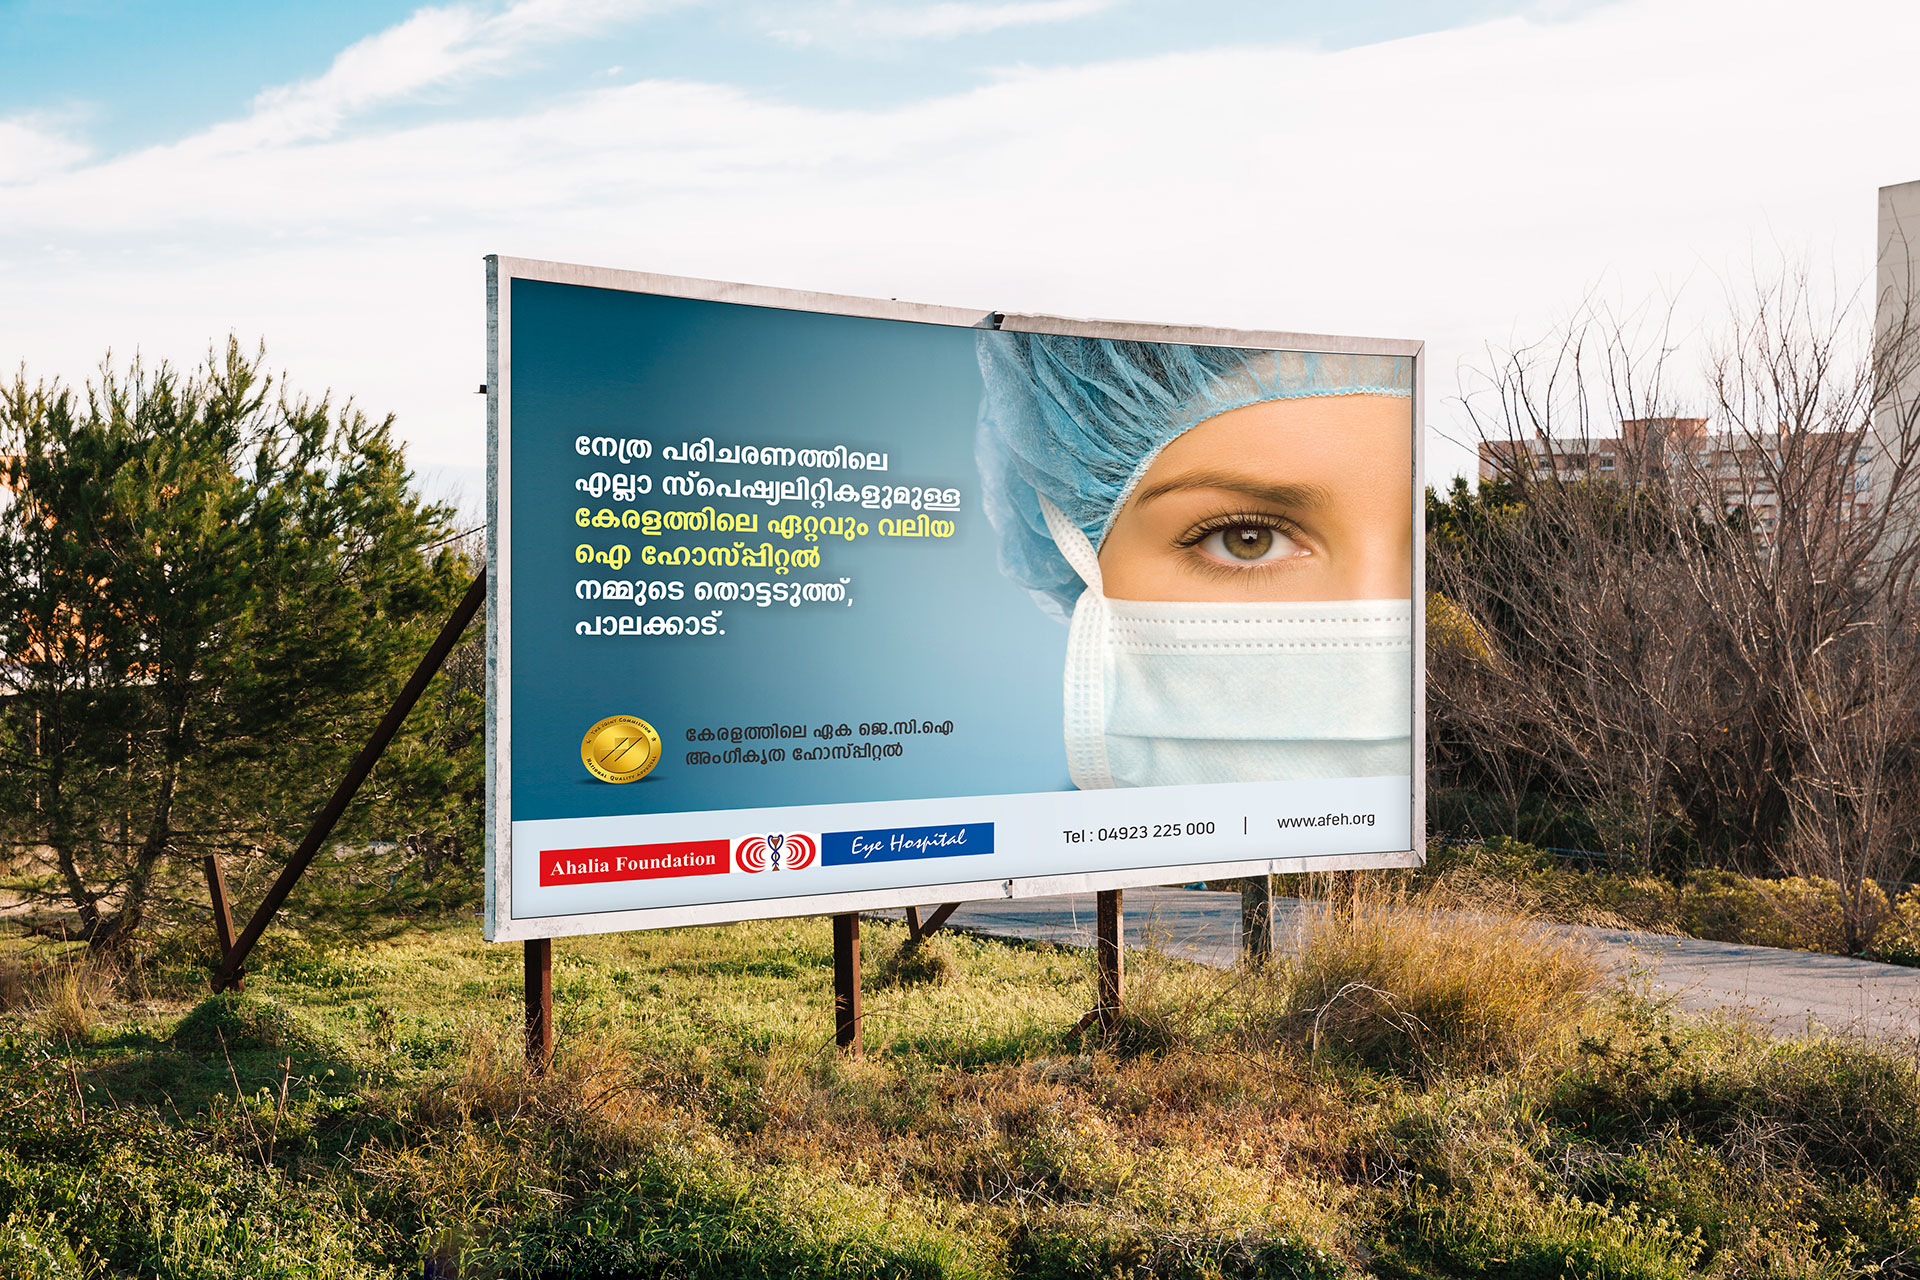 A bill board on landscape displaying the Ahaliya Eye Foundation Hospital design consists of a surgeon with mask